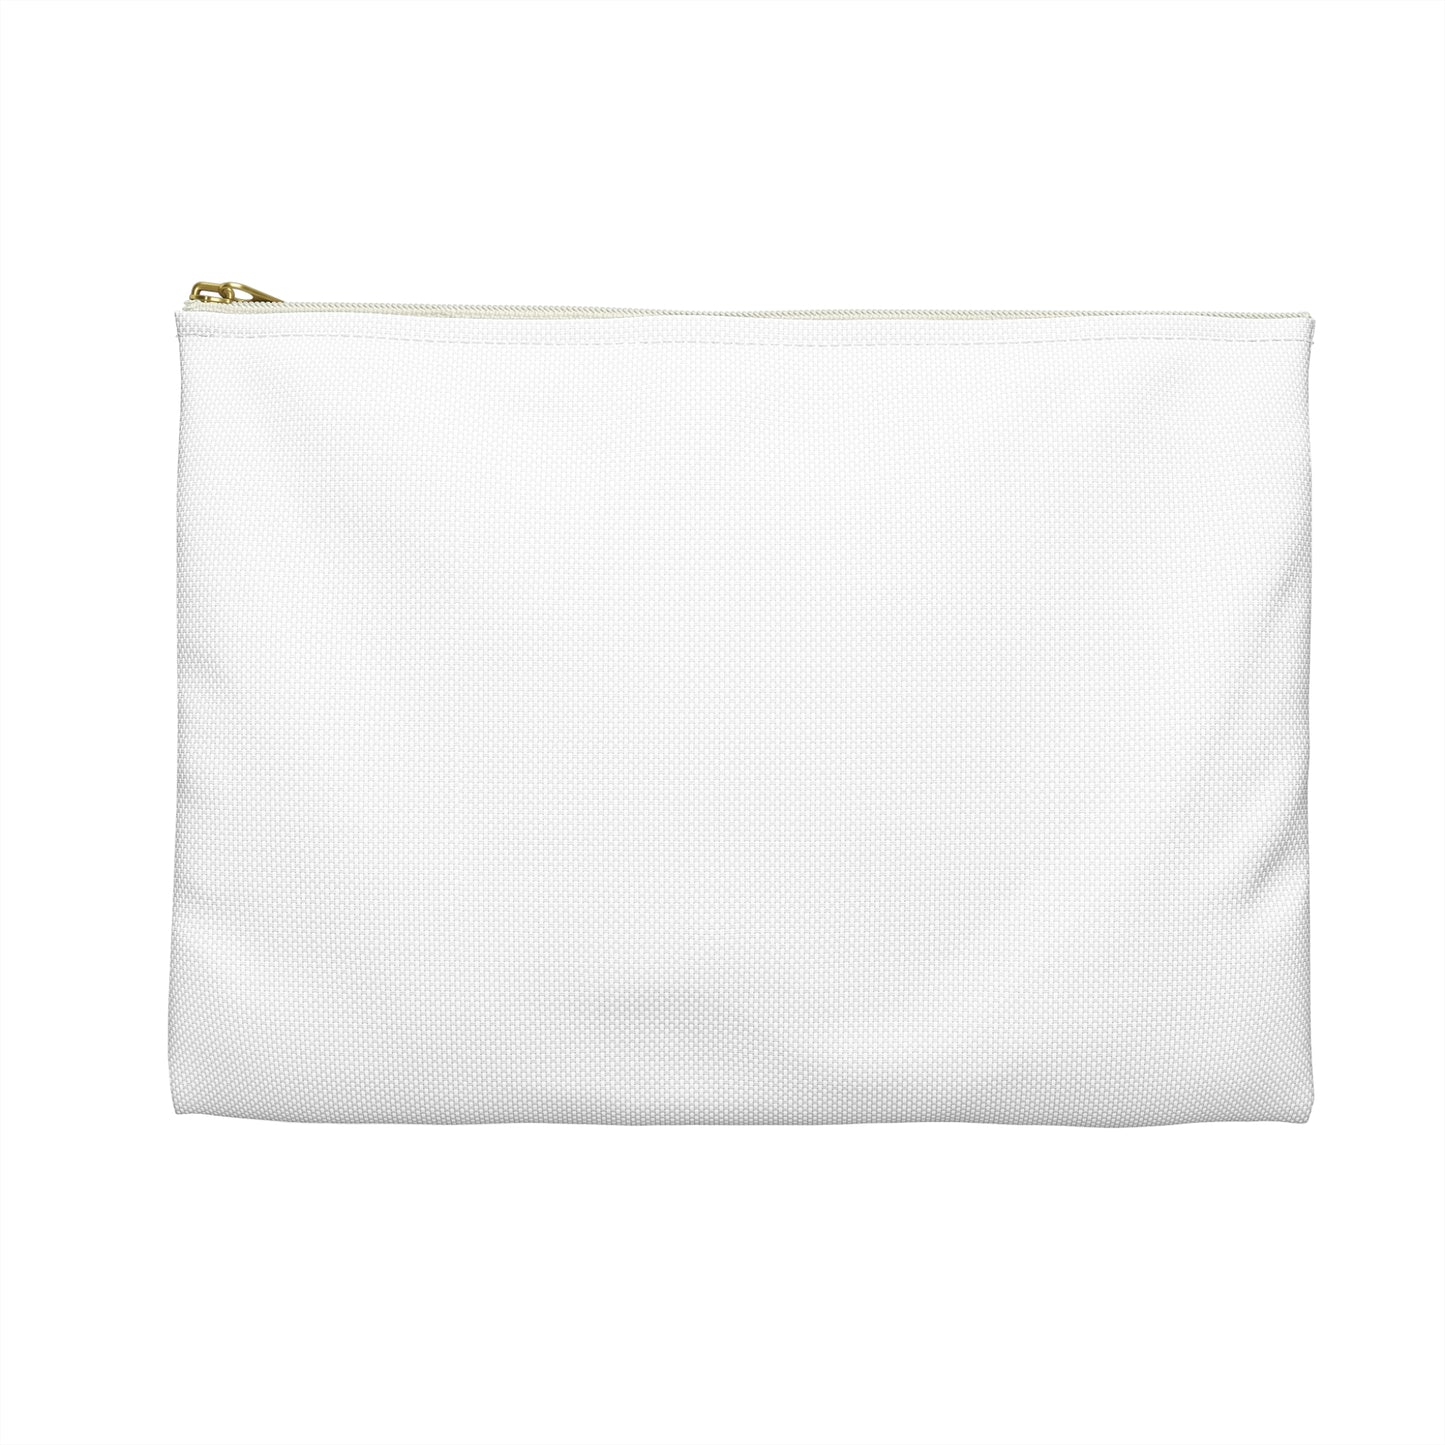 Heather Slade Accessory Pouch